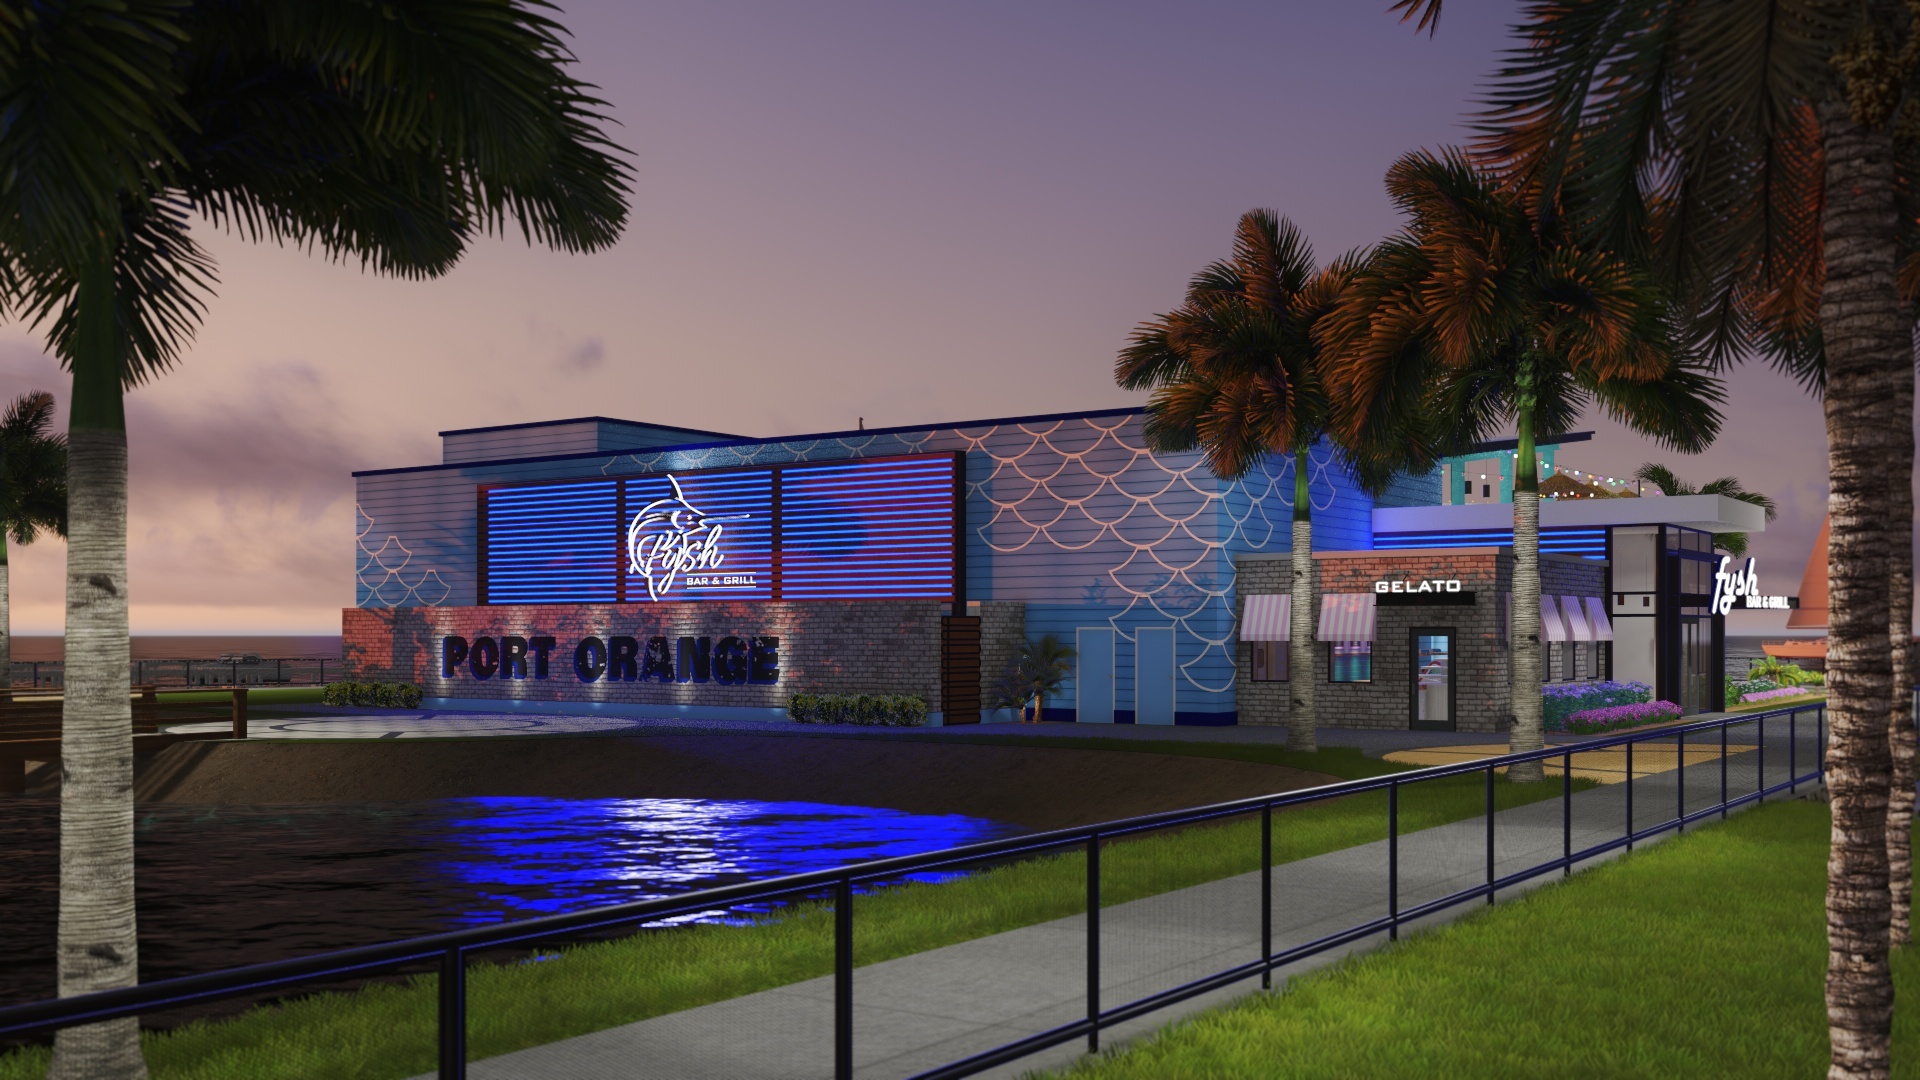 An artist's rendering of the Fysh Bar & Grill planned in Port Orange.